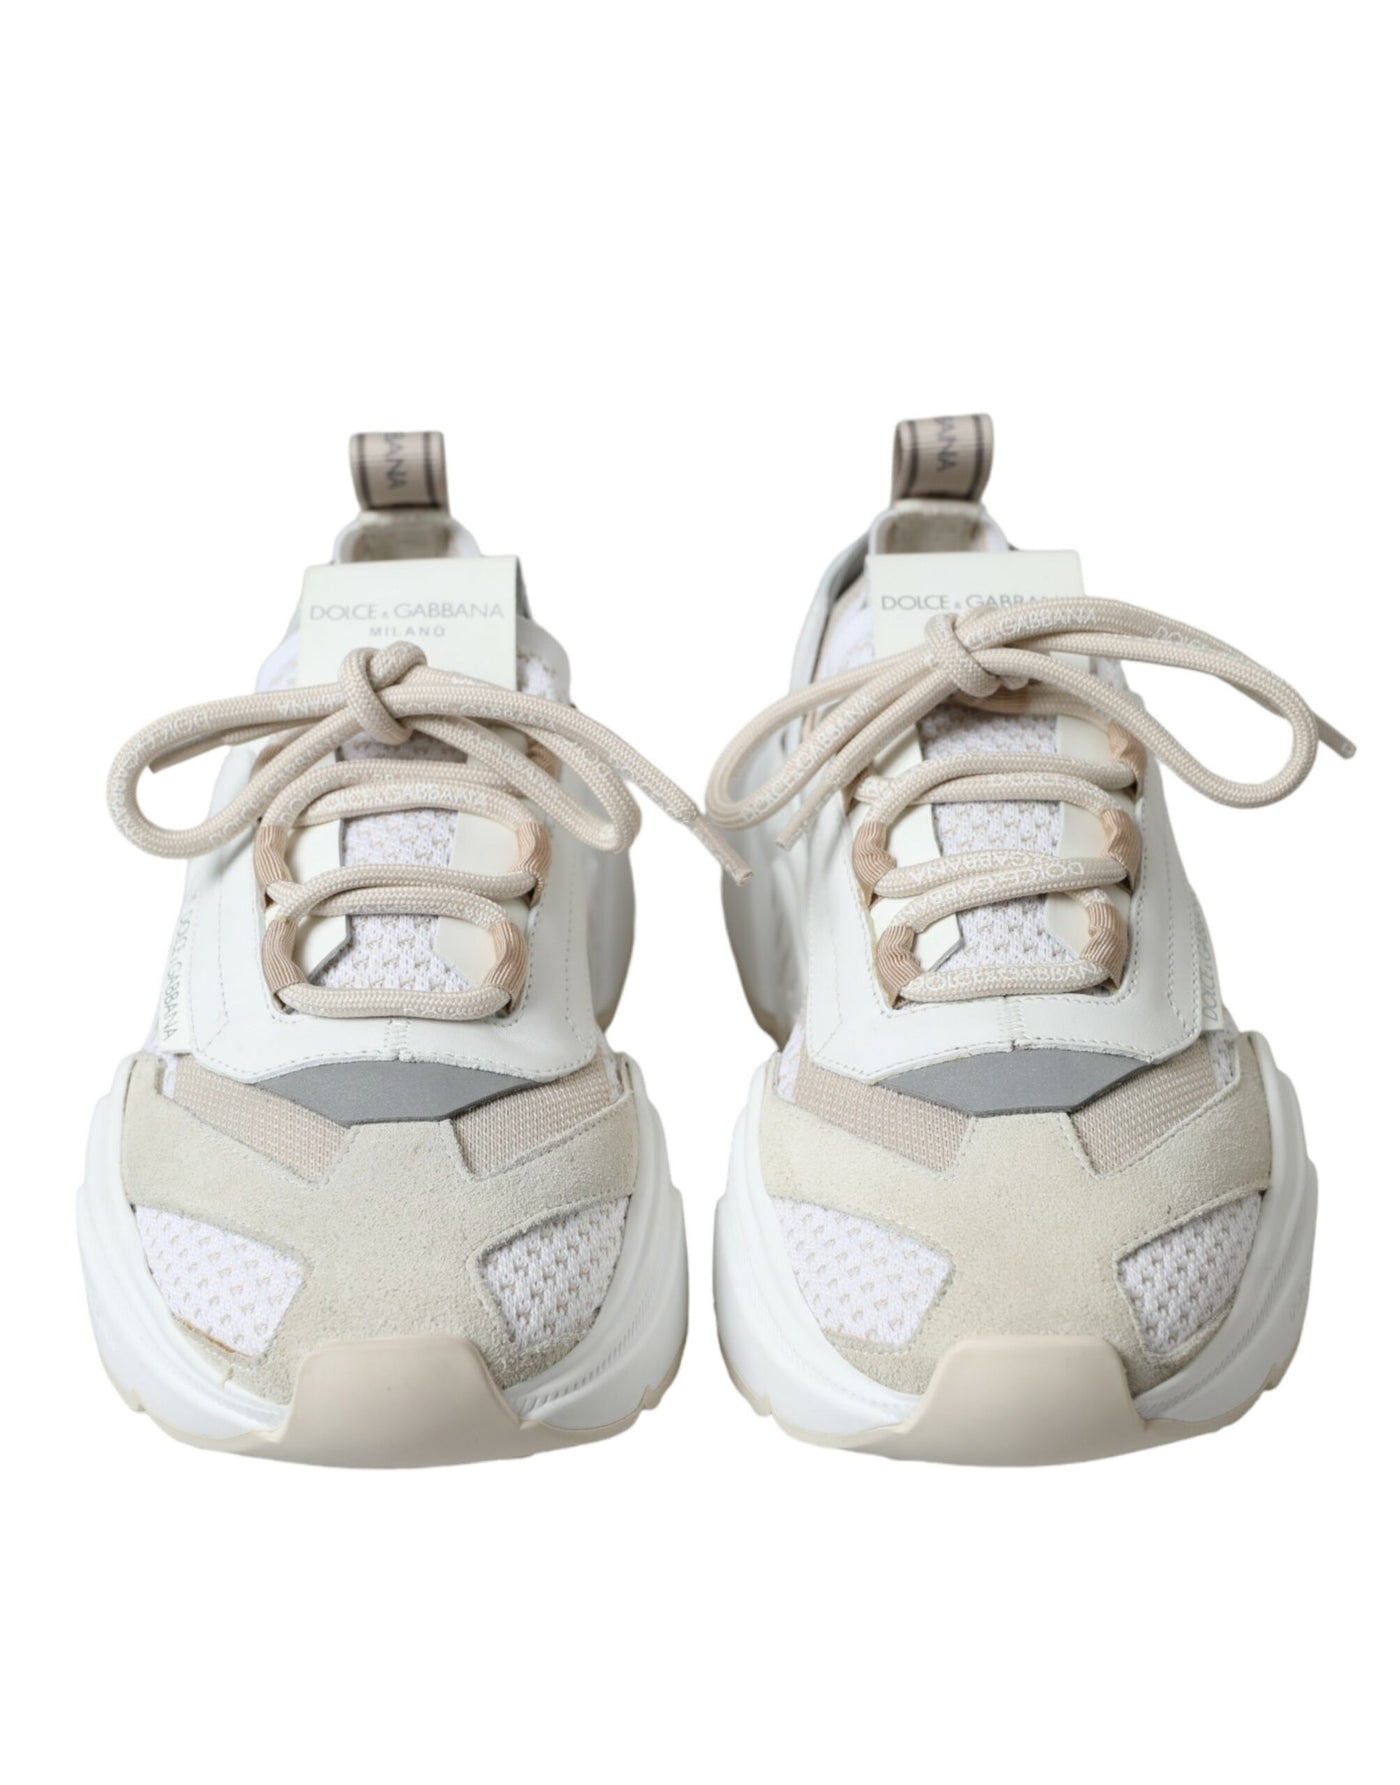 Dolce & Gabbana Beige White Daymaster Low Top Leather Sneakers Shoes